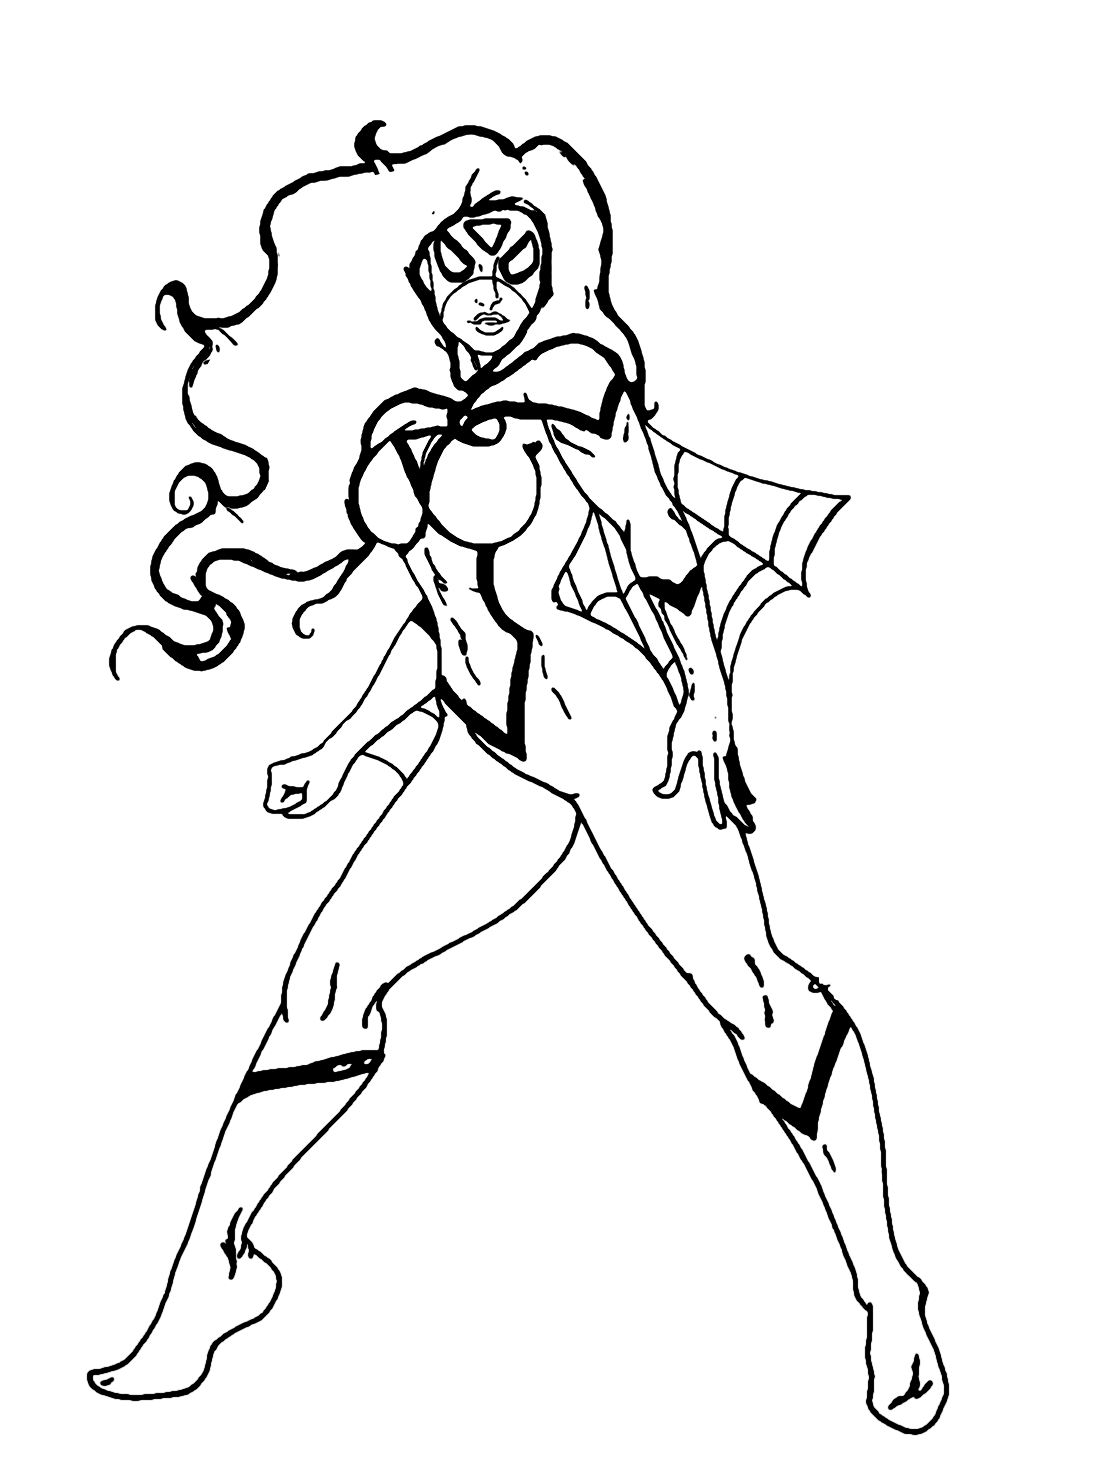 Spider woman picture